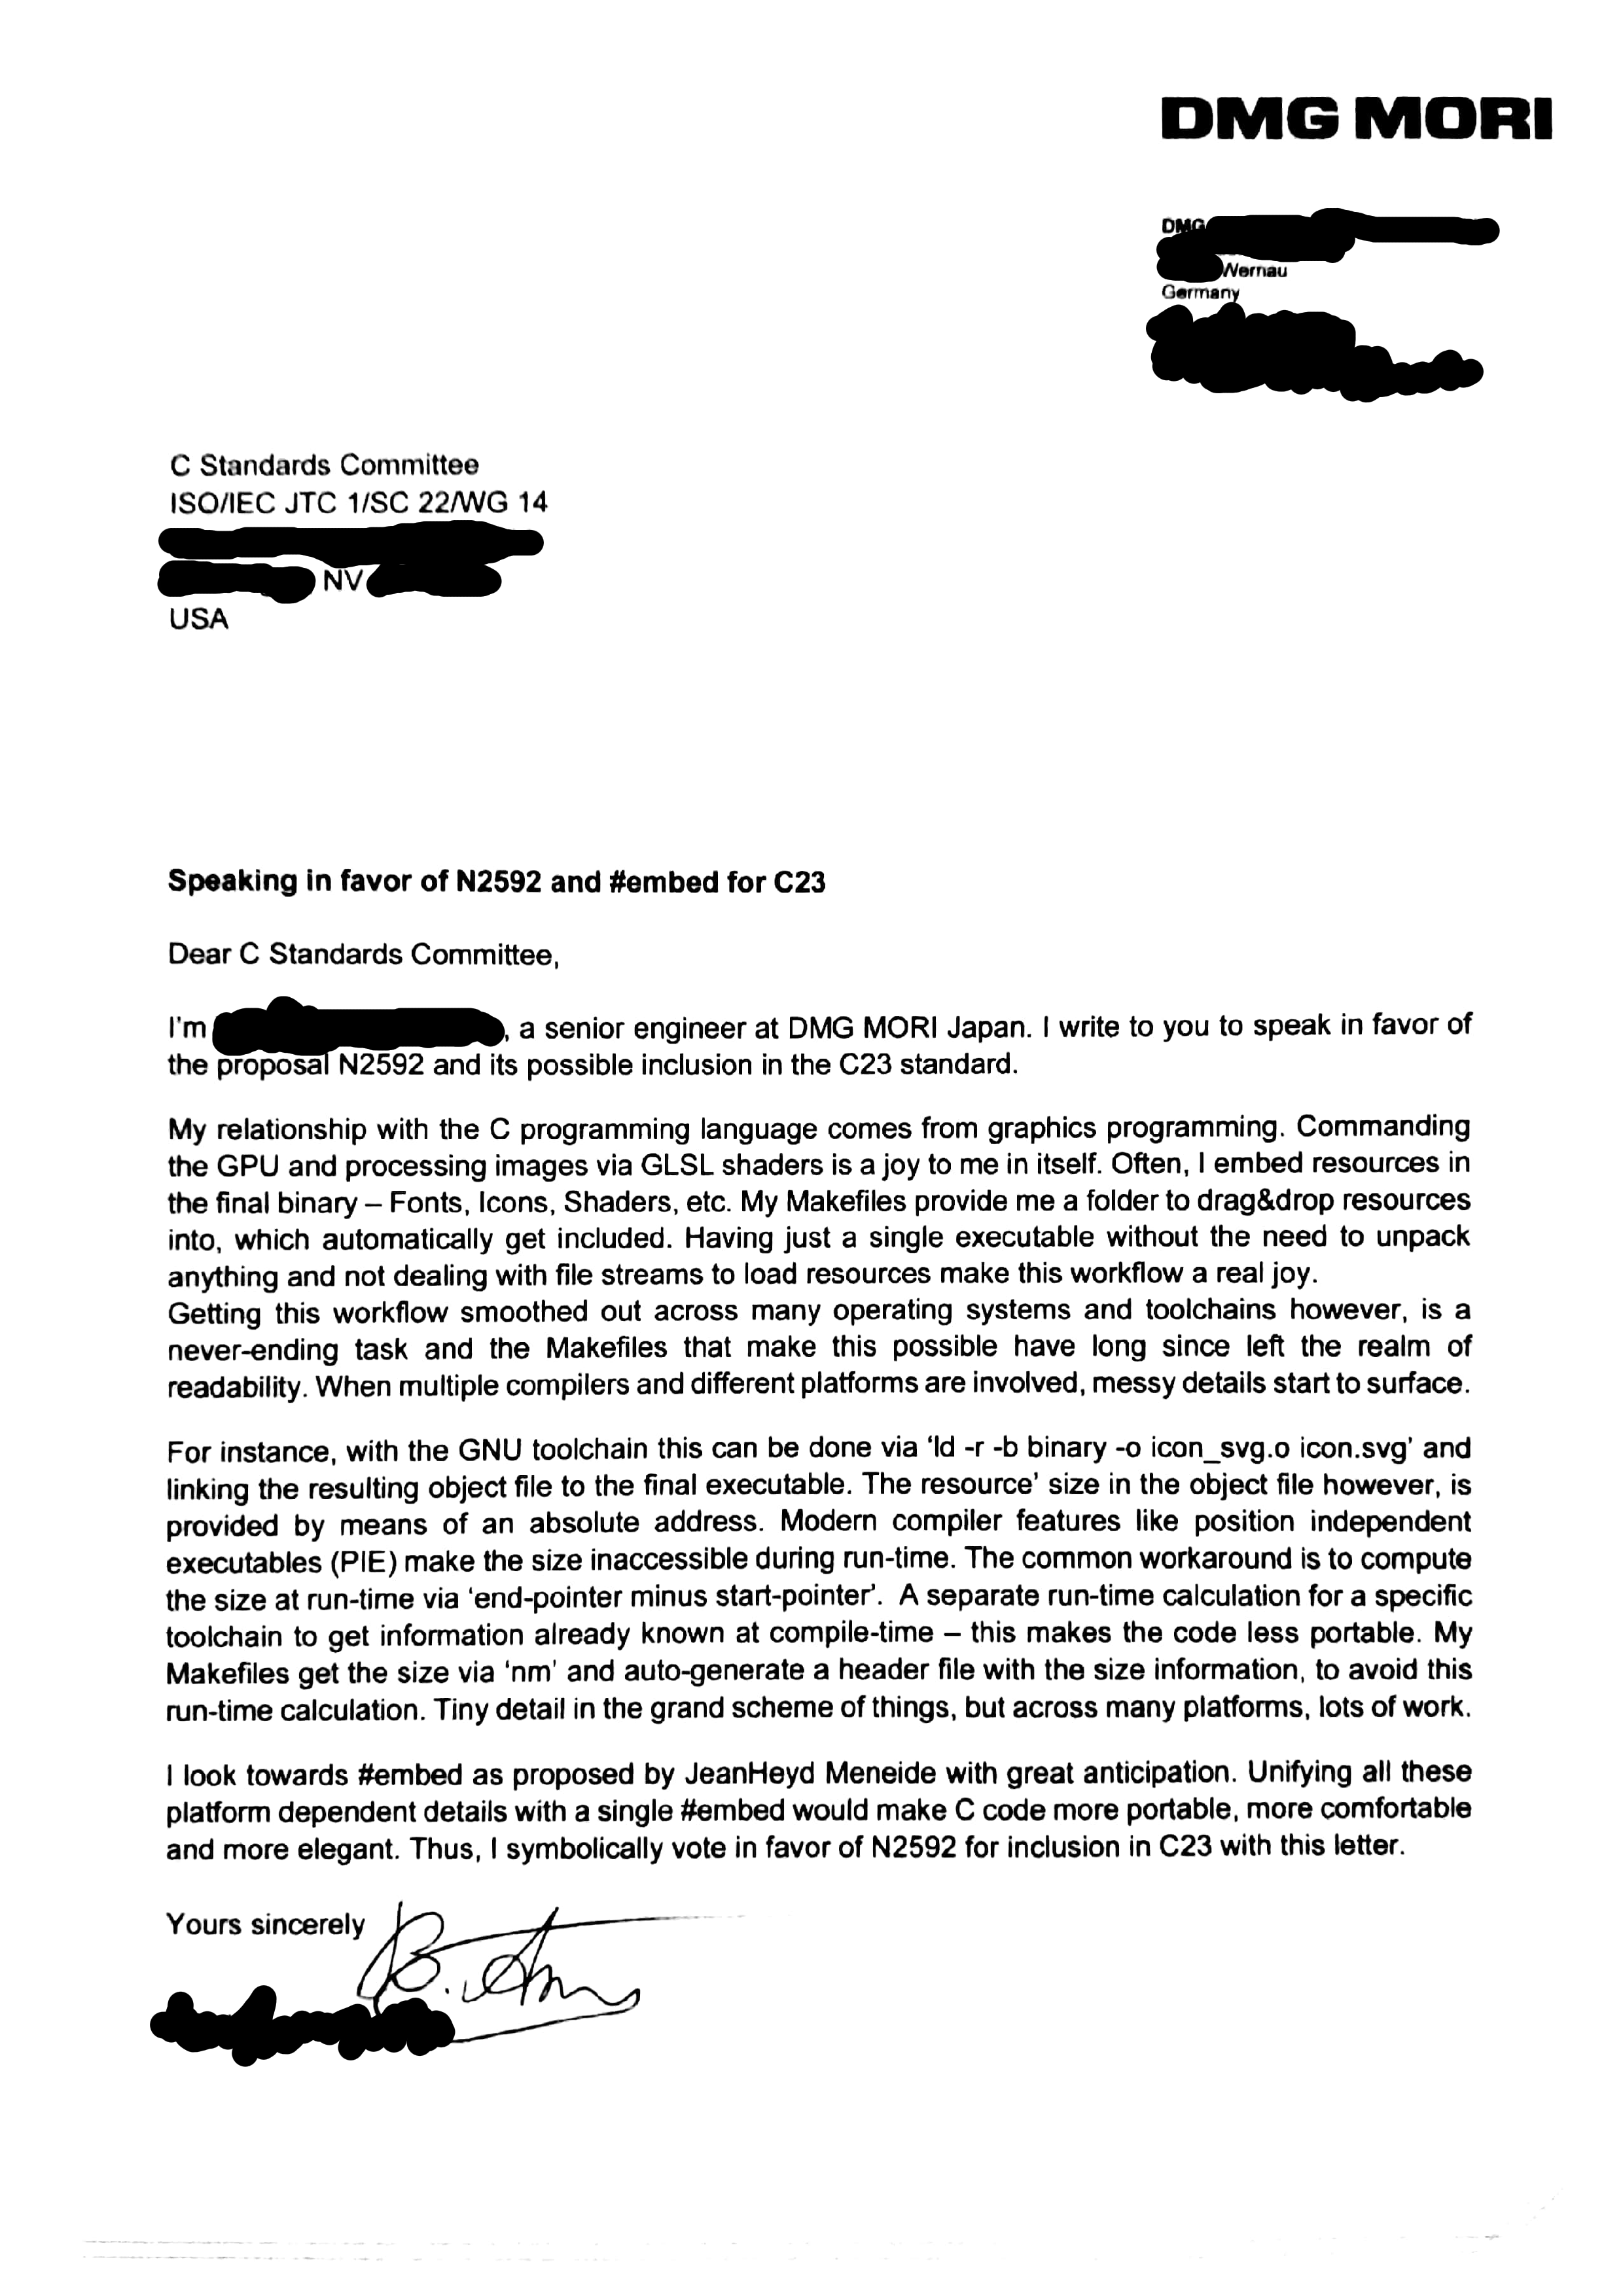 "A letter from a company by the name of 'DMG Mori', sent to the C Standards Committee (with the address of the company, the Committee, and name/e-mail of the signee blacked out). The full text is included just below, for reading."